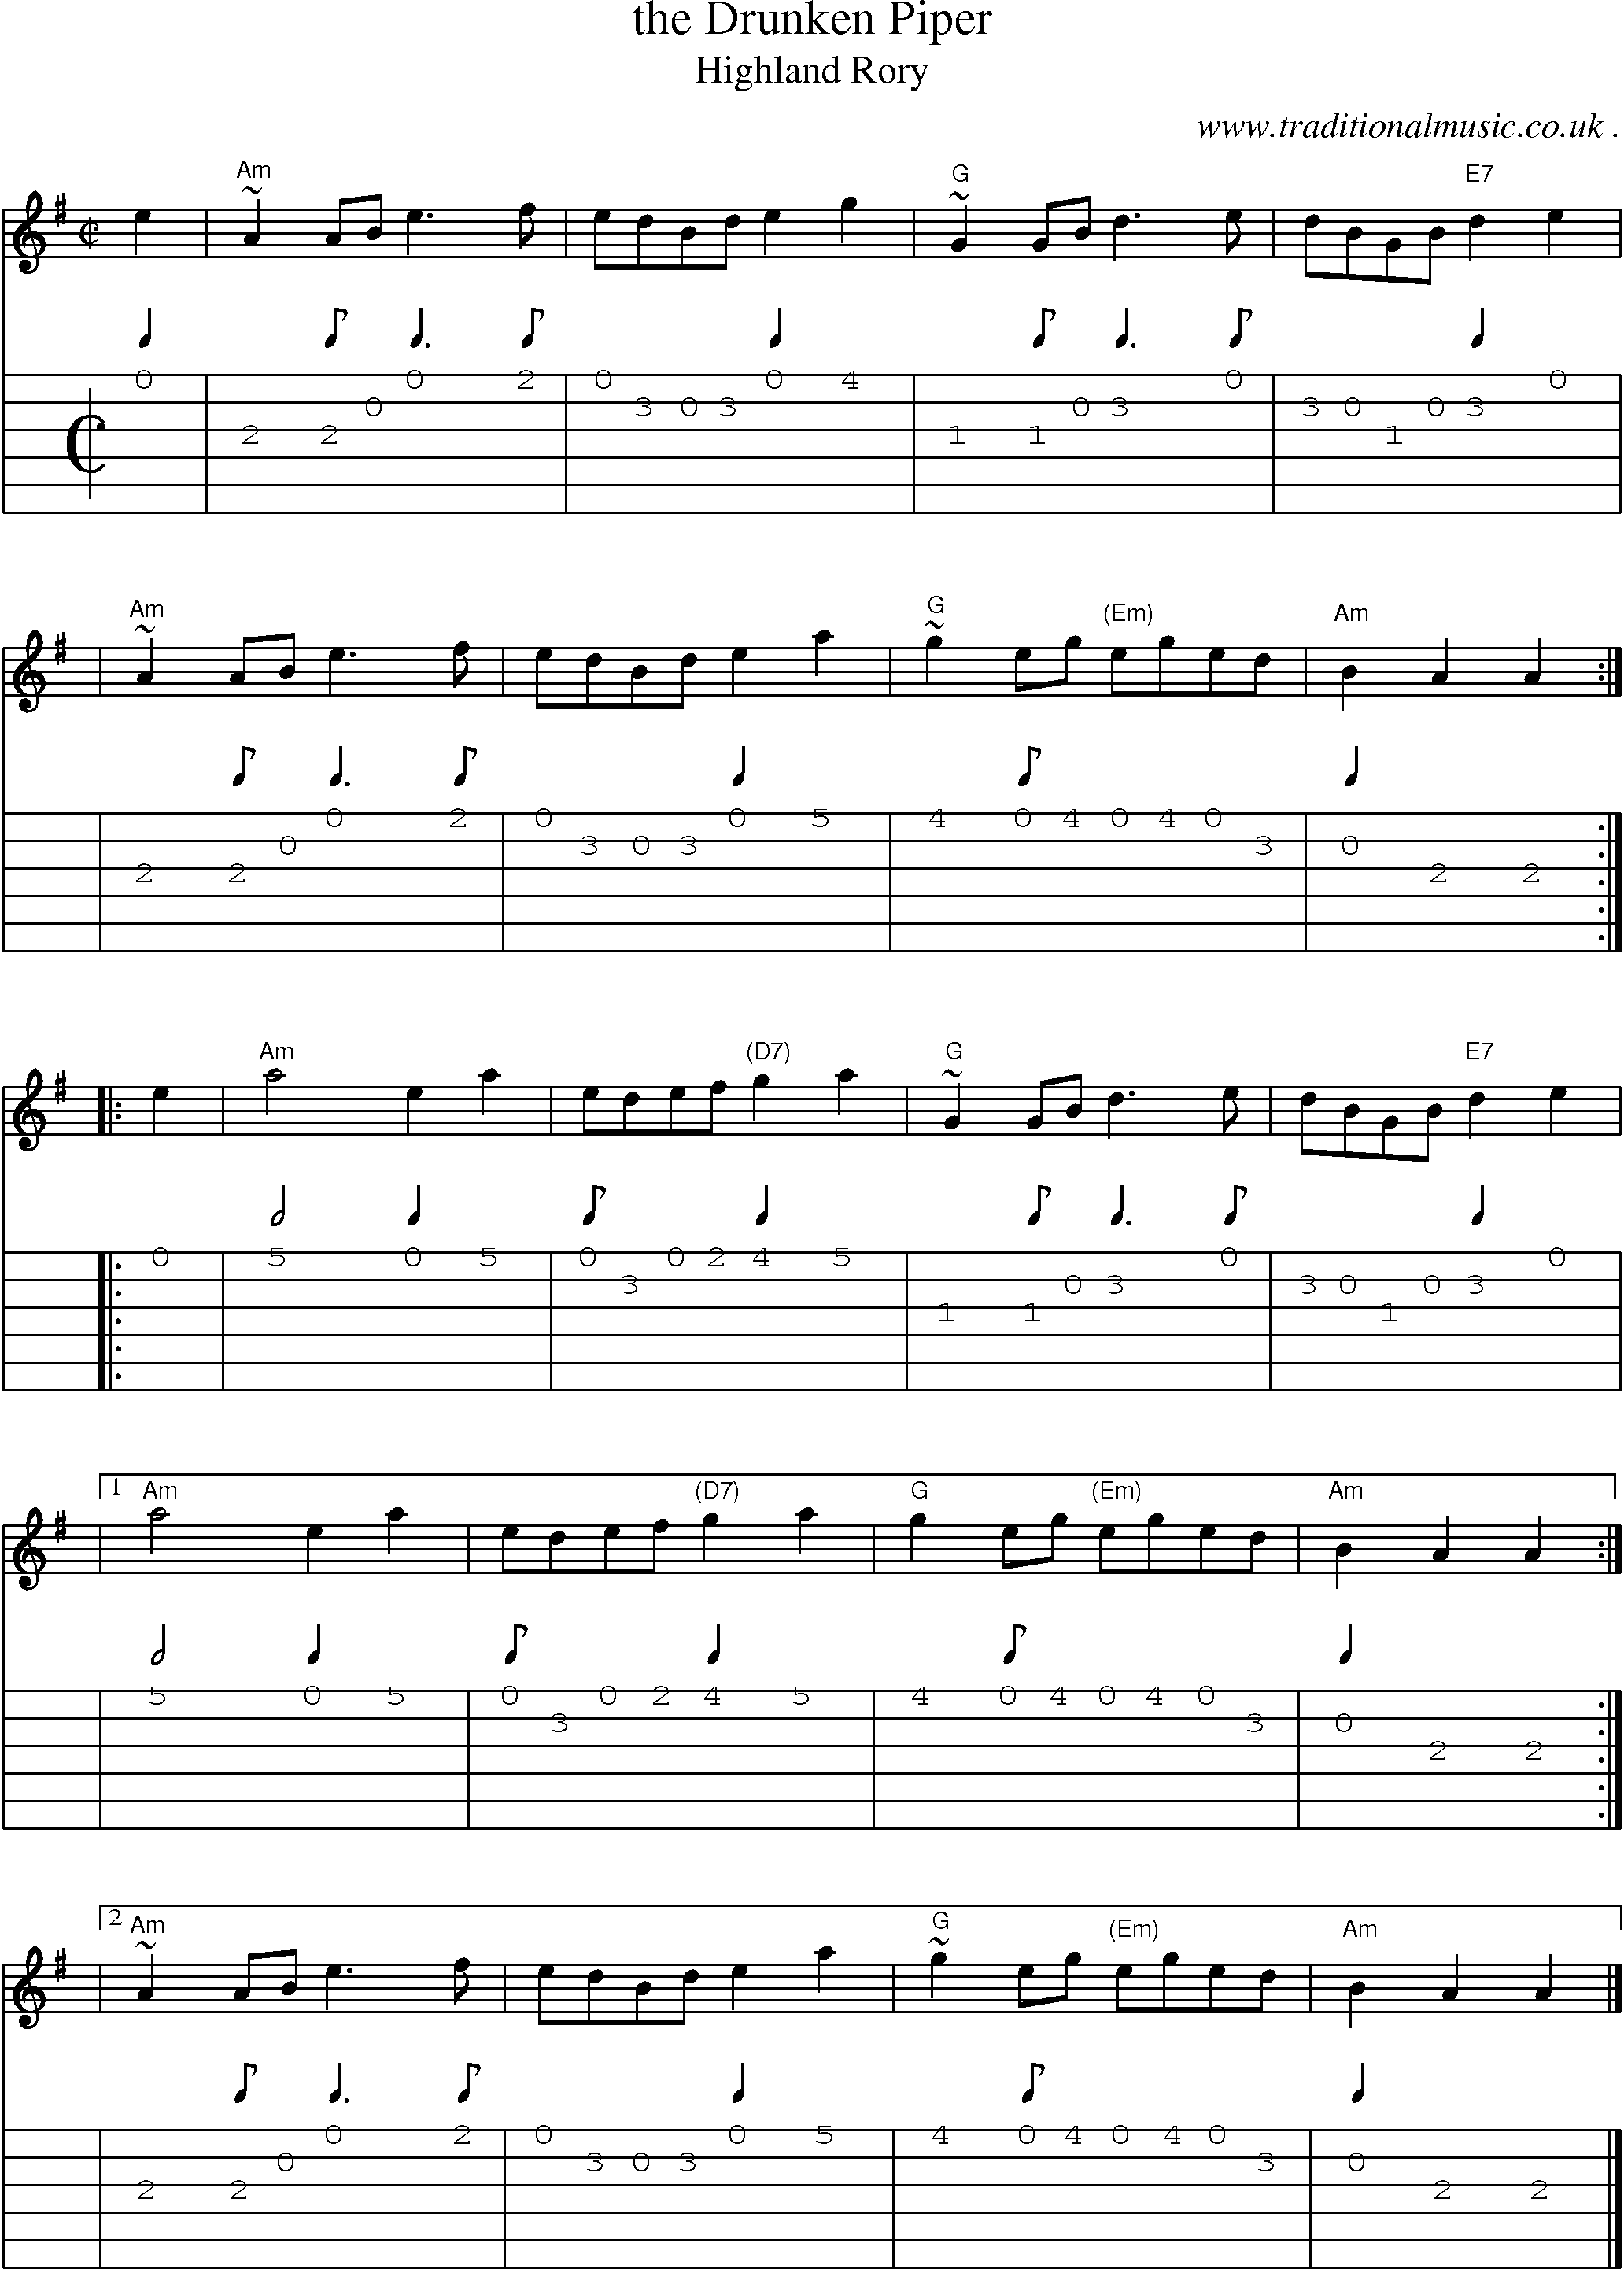 Sheet-music  score, Chords and Guitar Tabs for The Drunken Piper